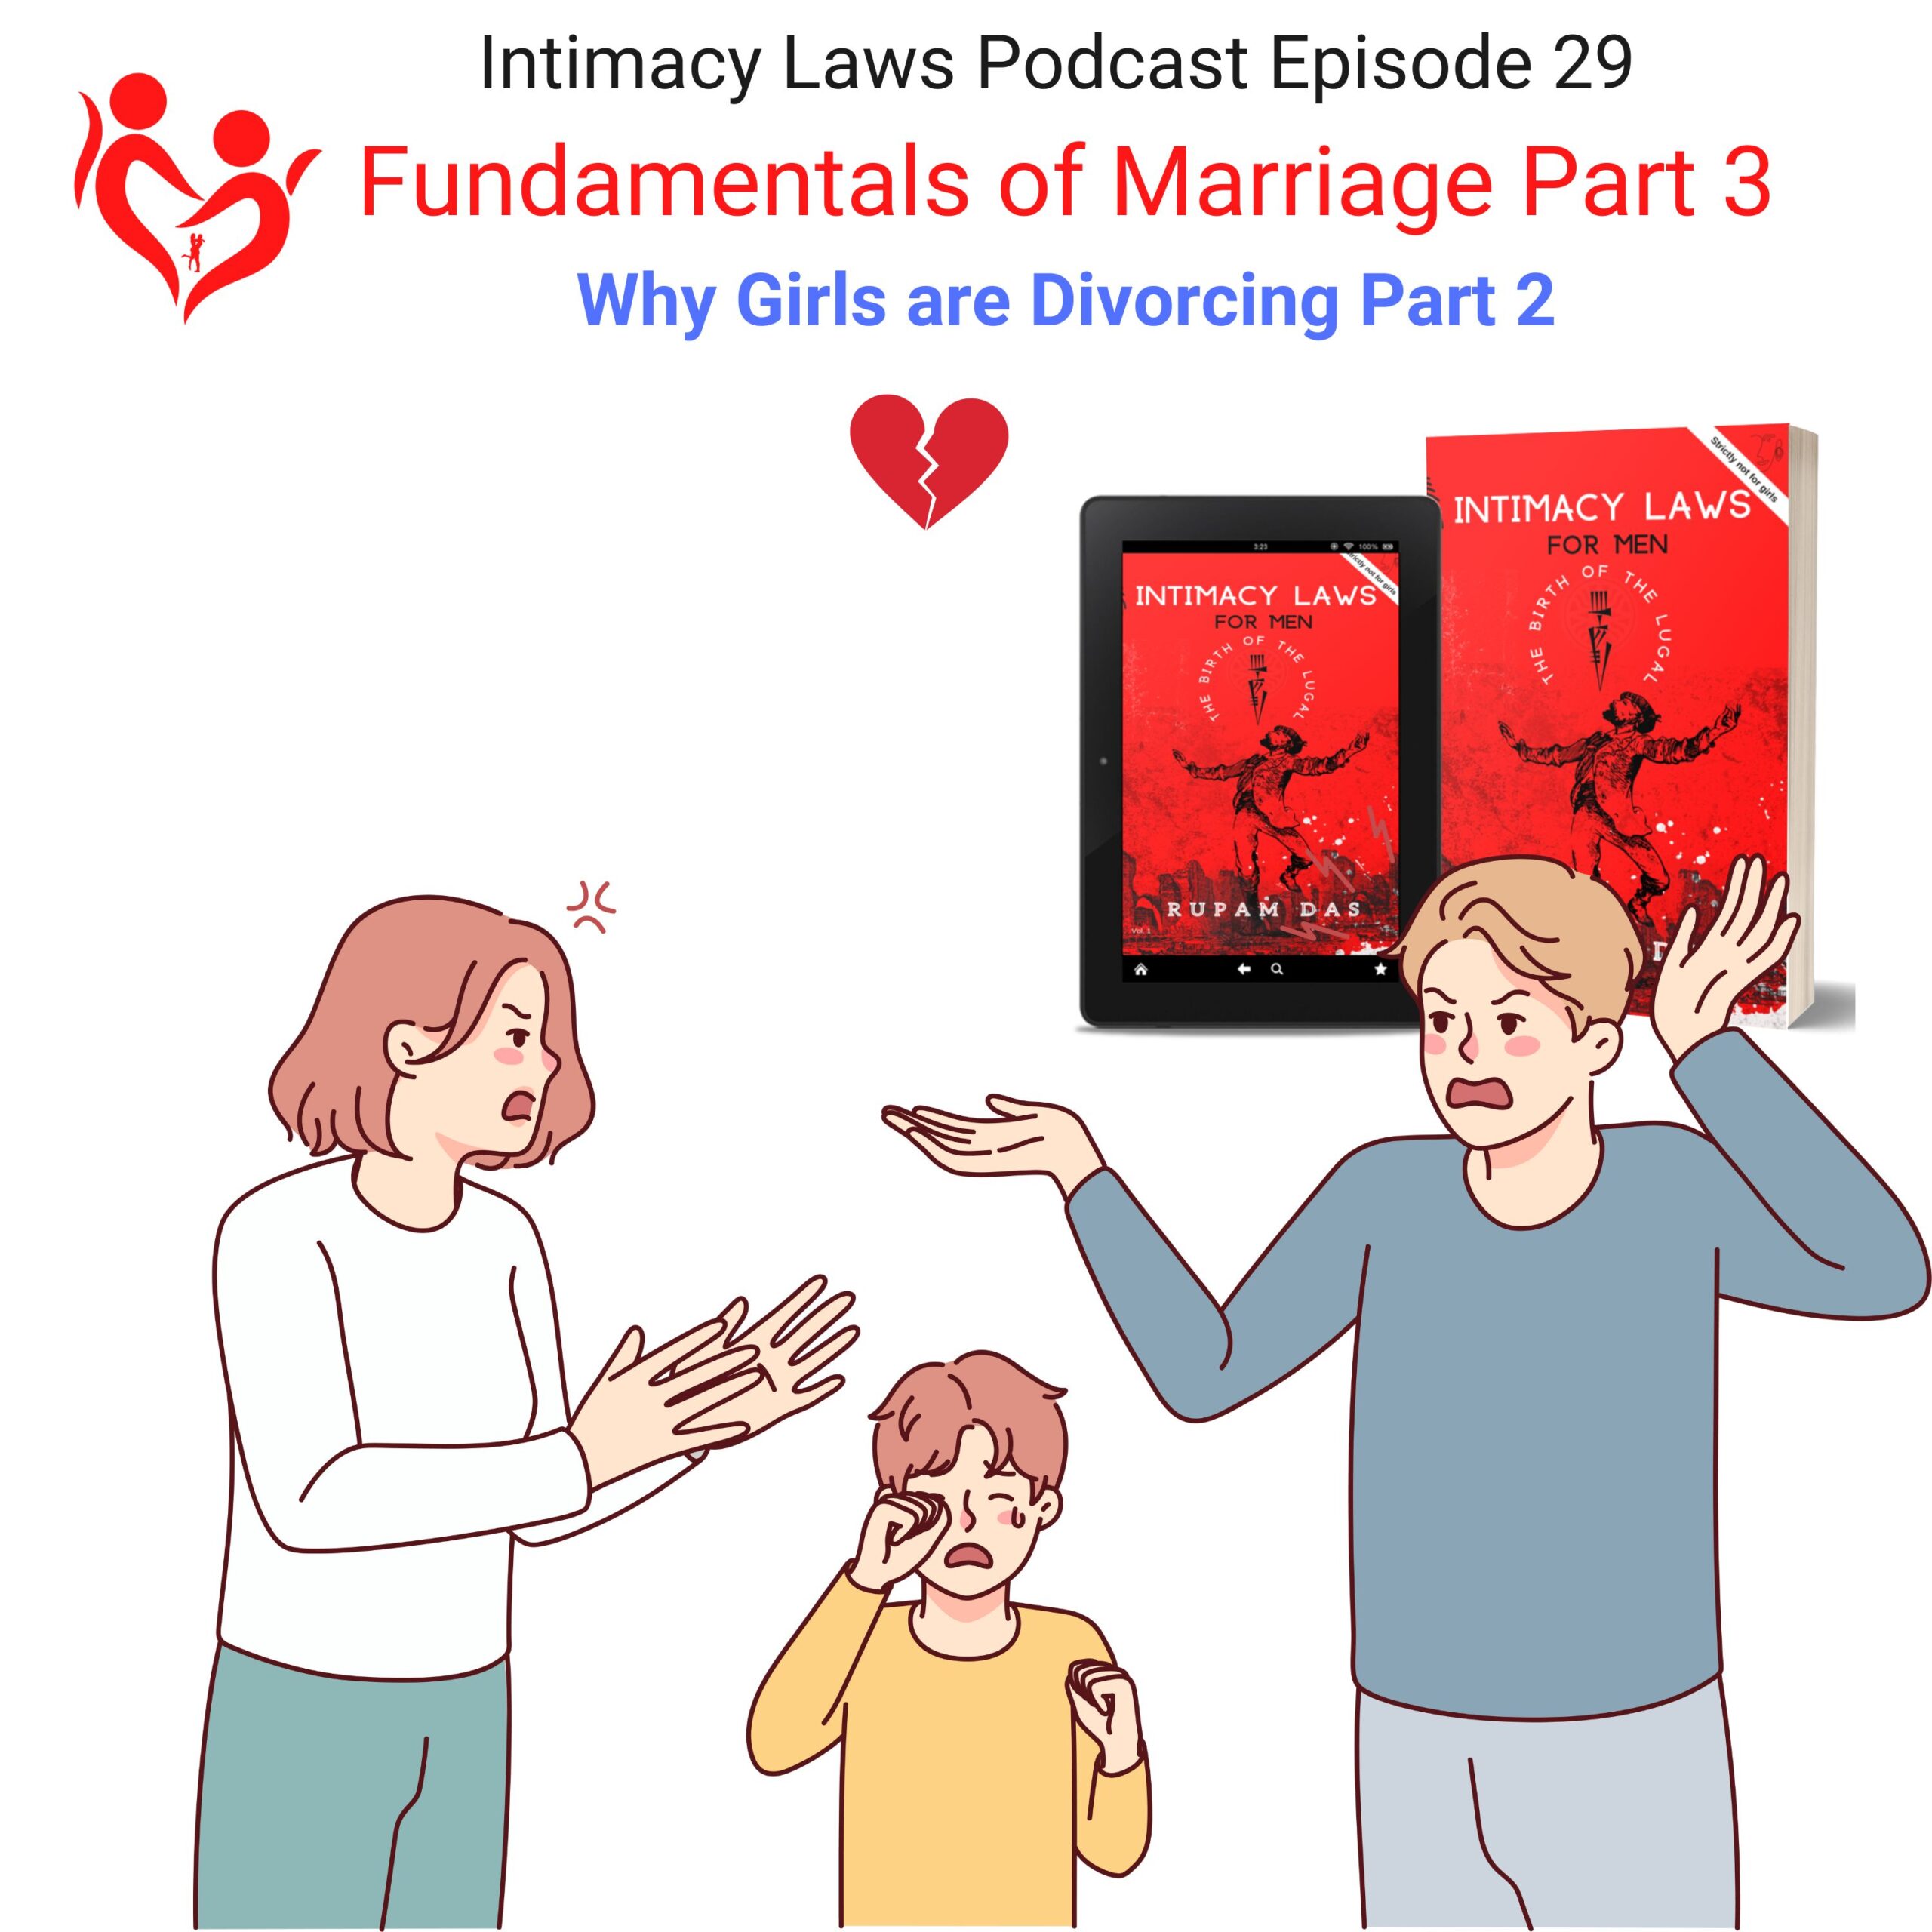 Intimacy Laws Podcast Episode 29 Fundamentals of Marriage Part 3 Why Girls are Divorcing Part 2